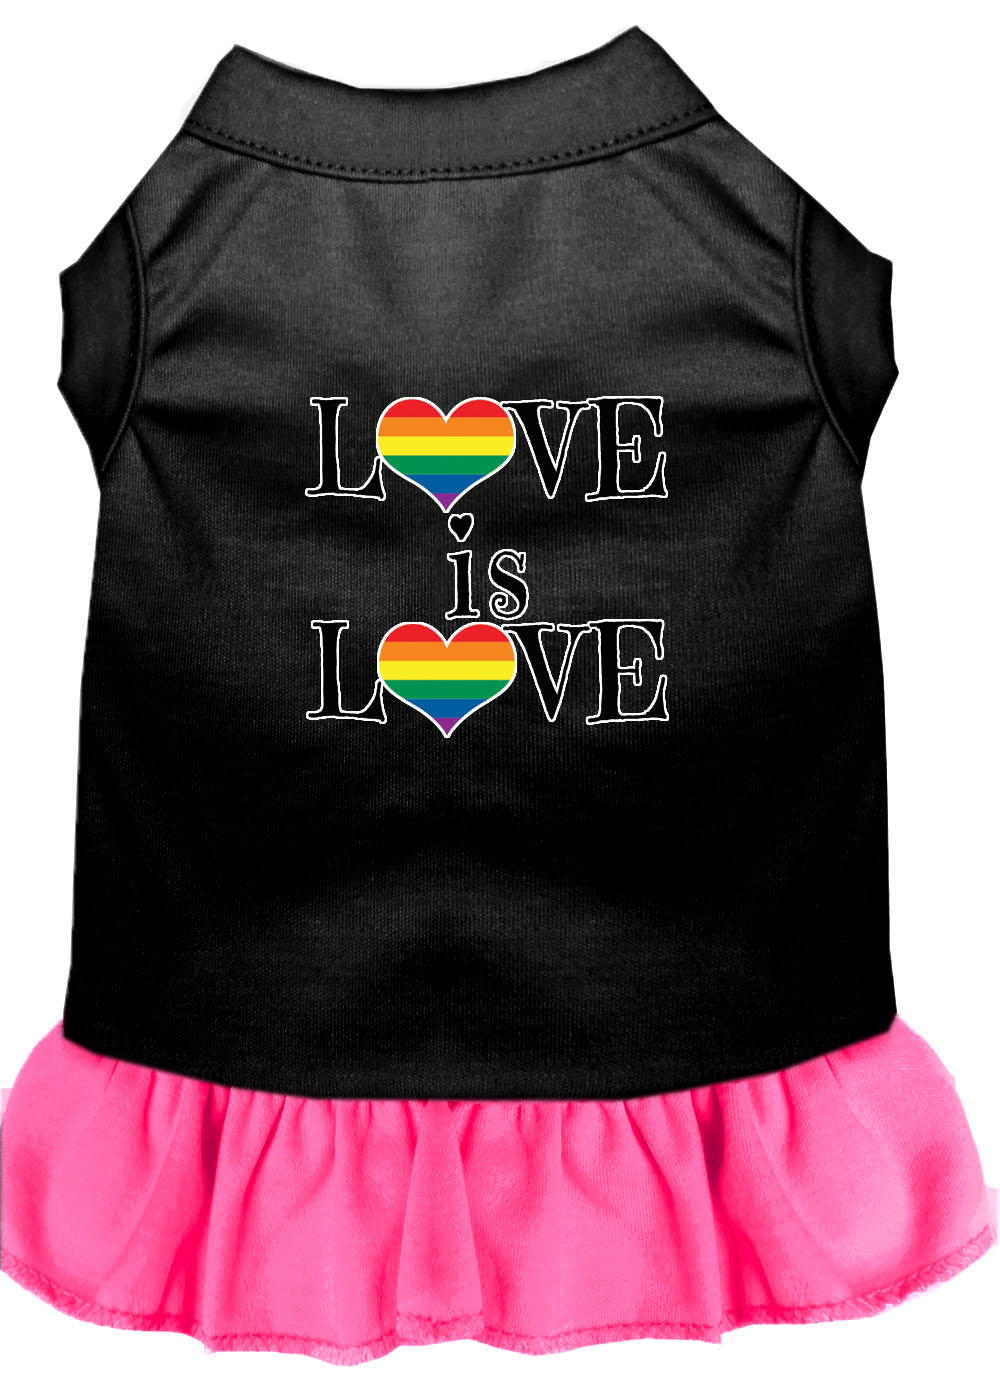 Love is Love Screen Print Dog Dress Black with Bright Pink Lg